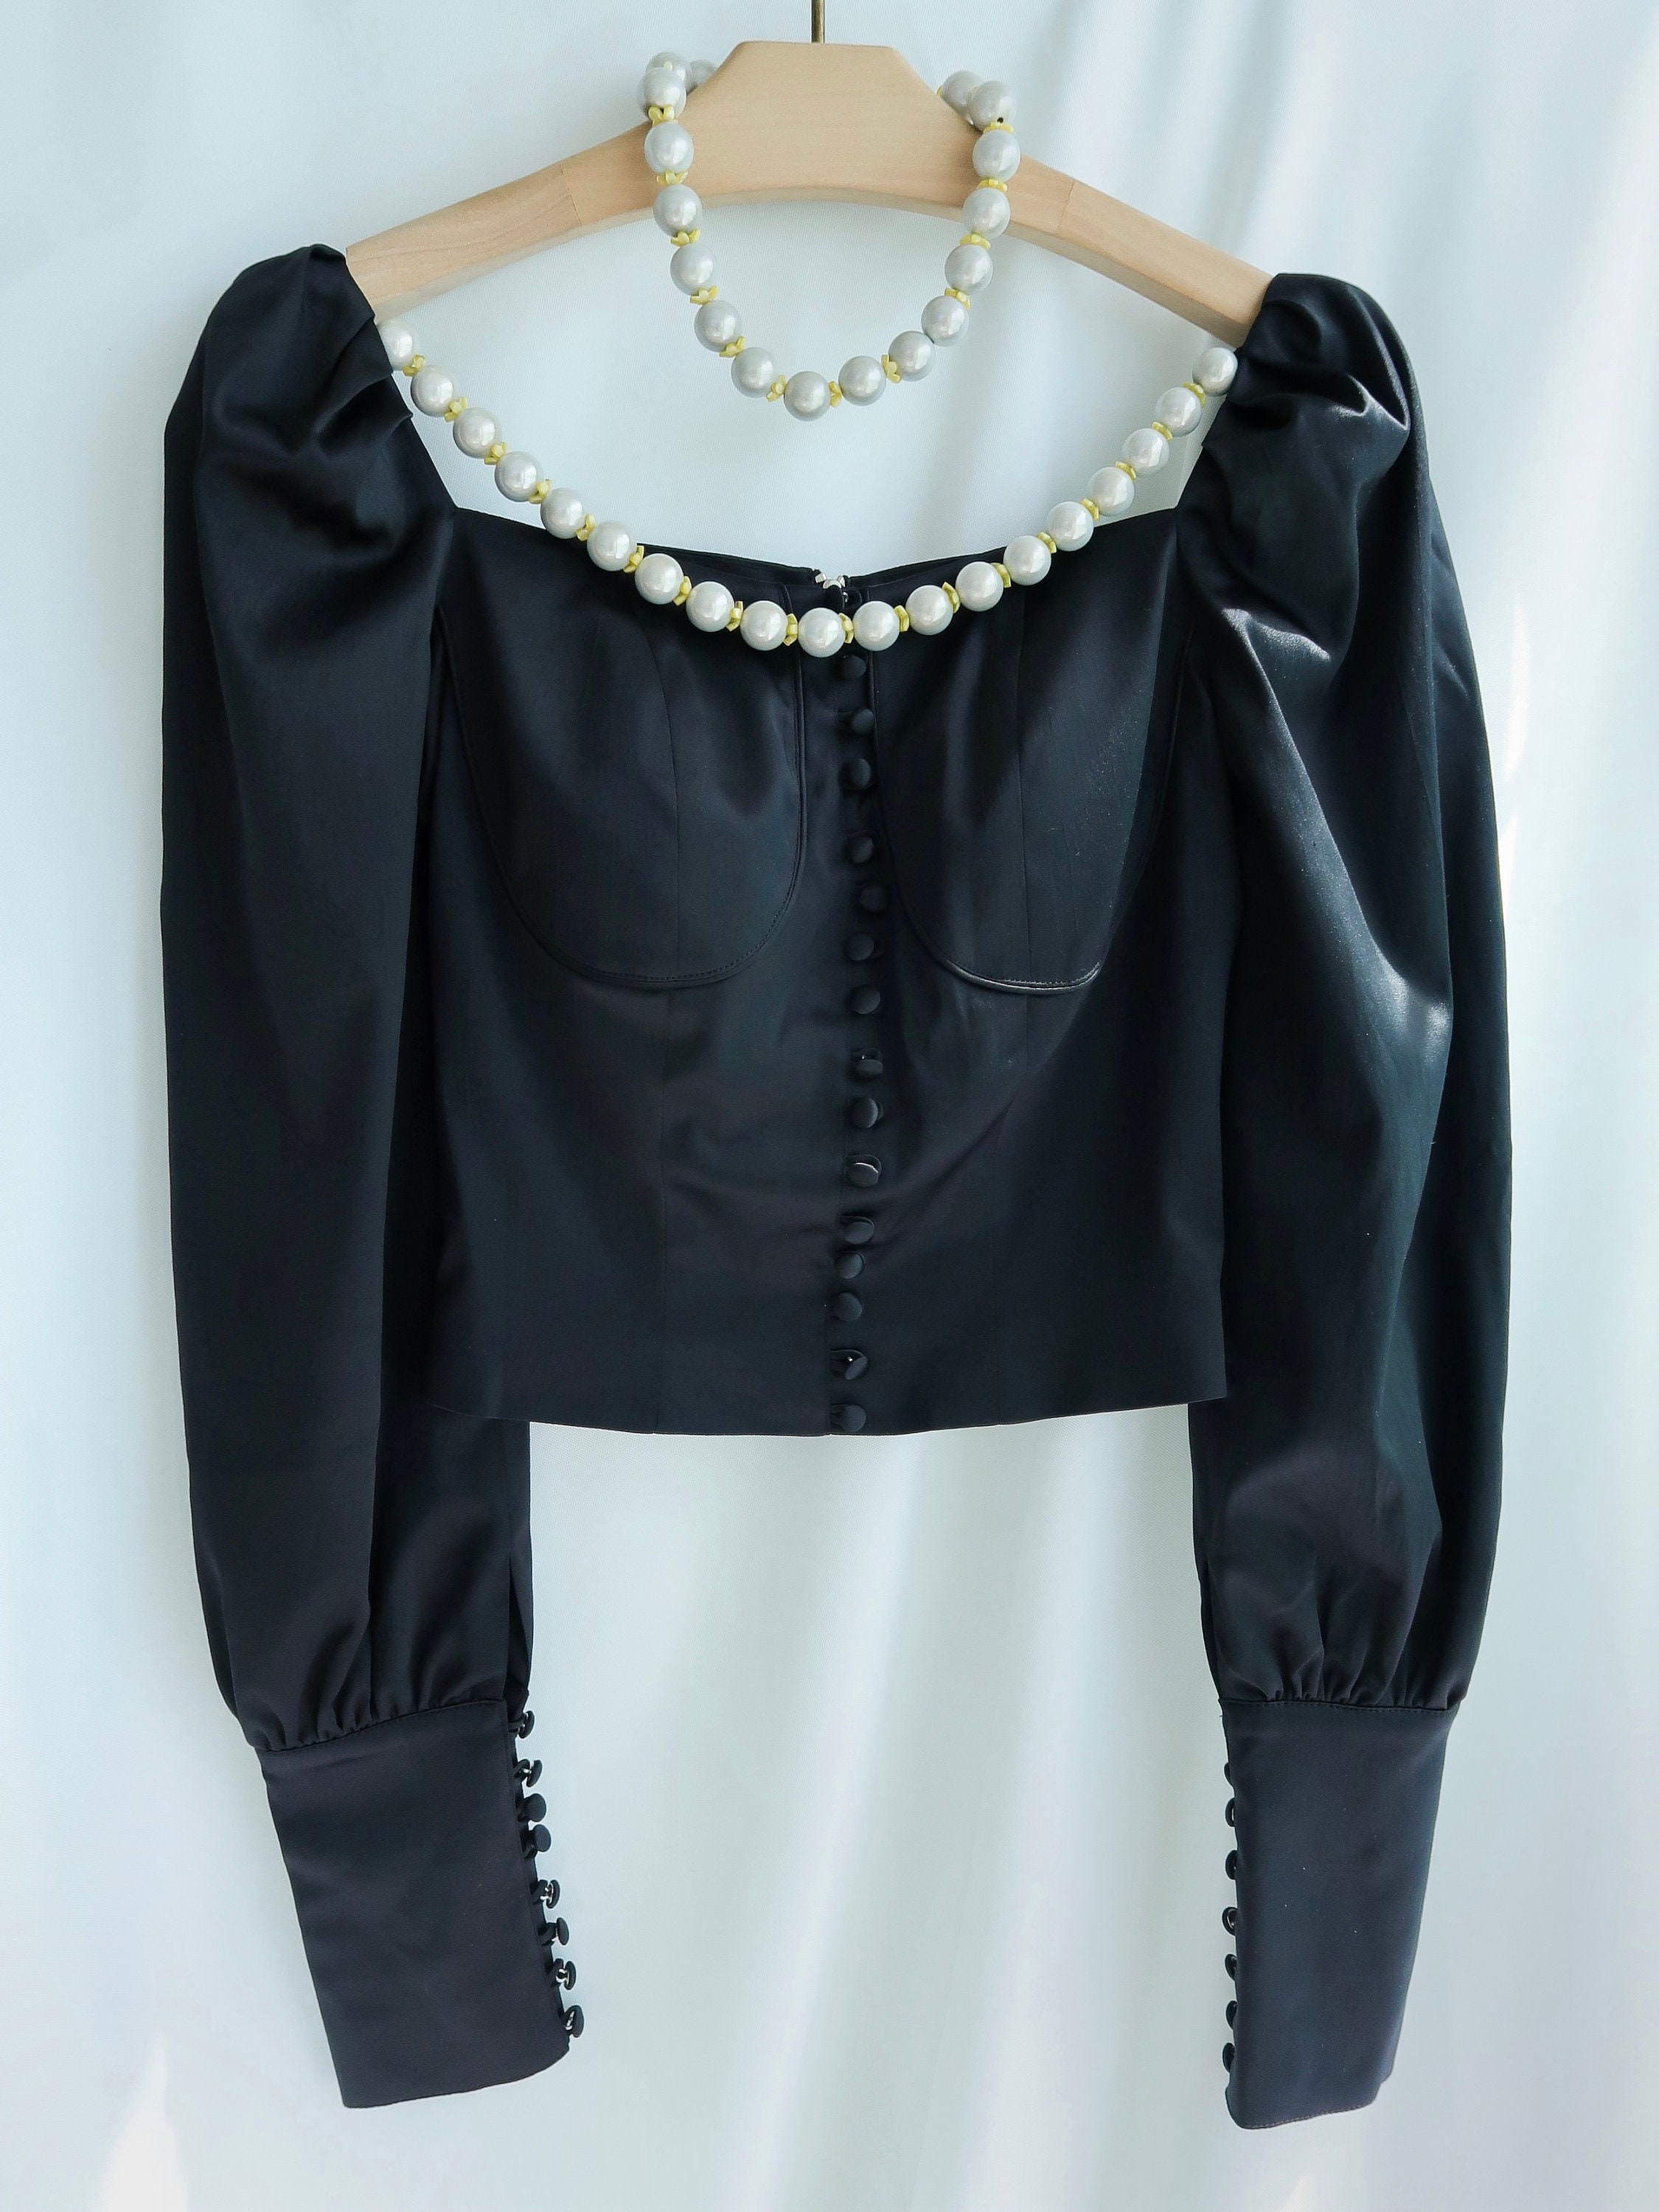 Victorian Button-embellished Satin Blouse With Pearls / MDNX Clothing ...